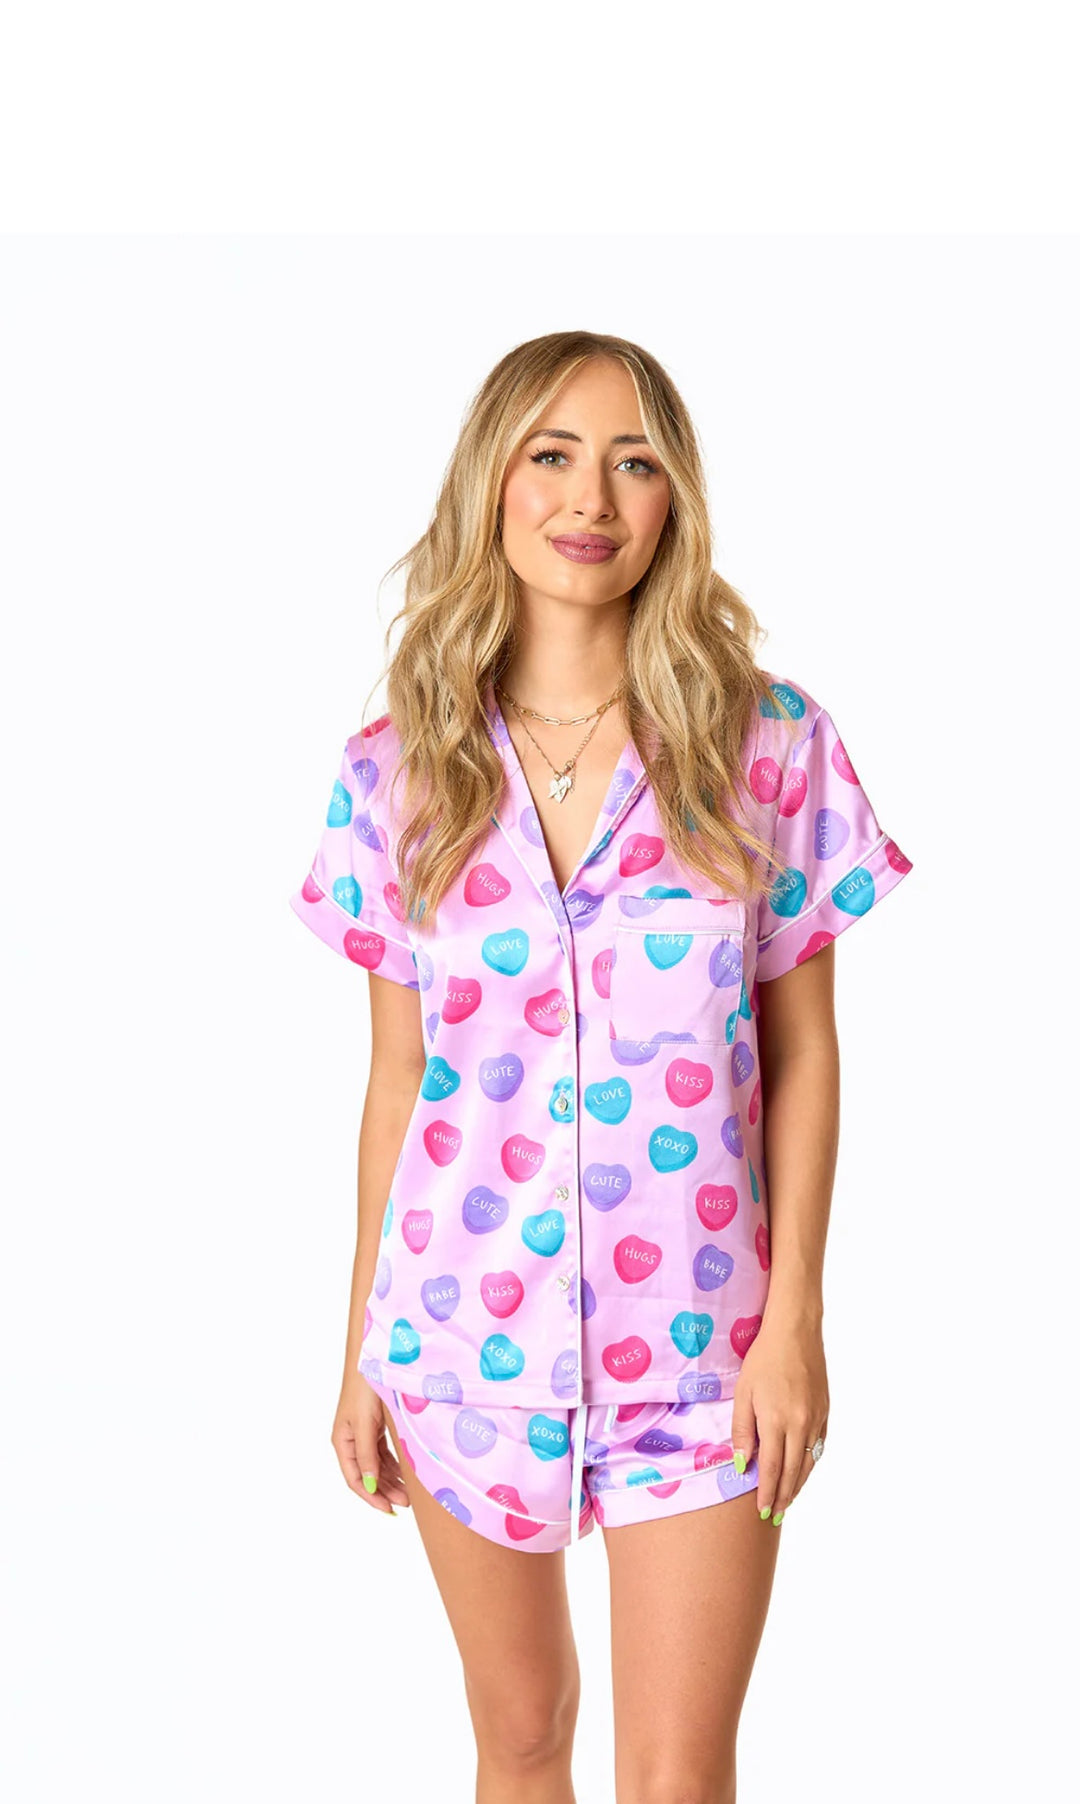 Aurora Sweet Hearts Pajama Set-One-Piece & Sets-Buddy Love-Shop with Bloom West Boutique, Women's Fashion Boutique, Located in Houma, Louisiana